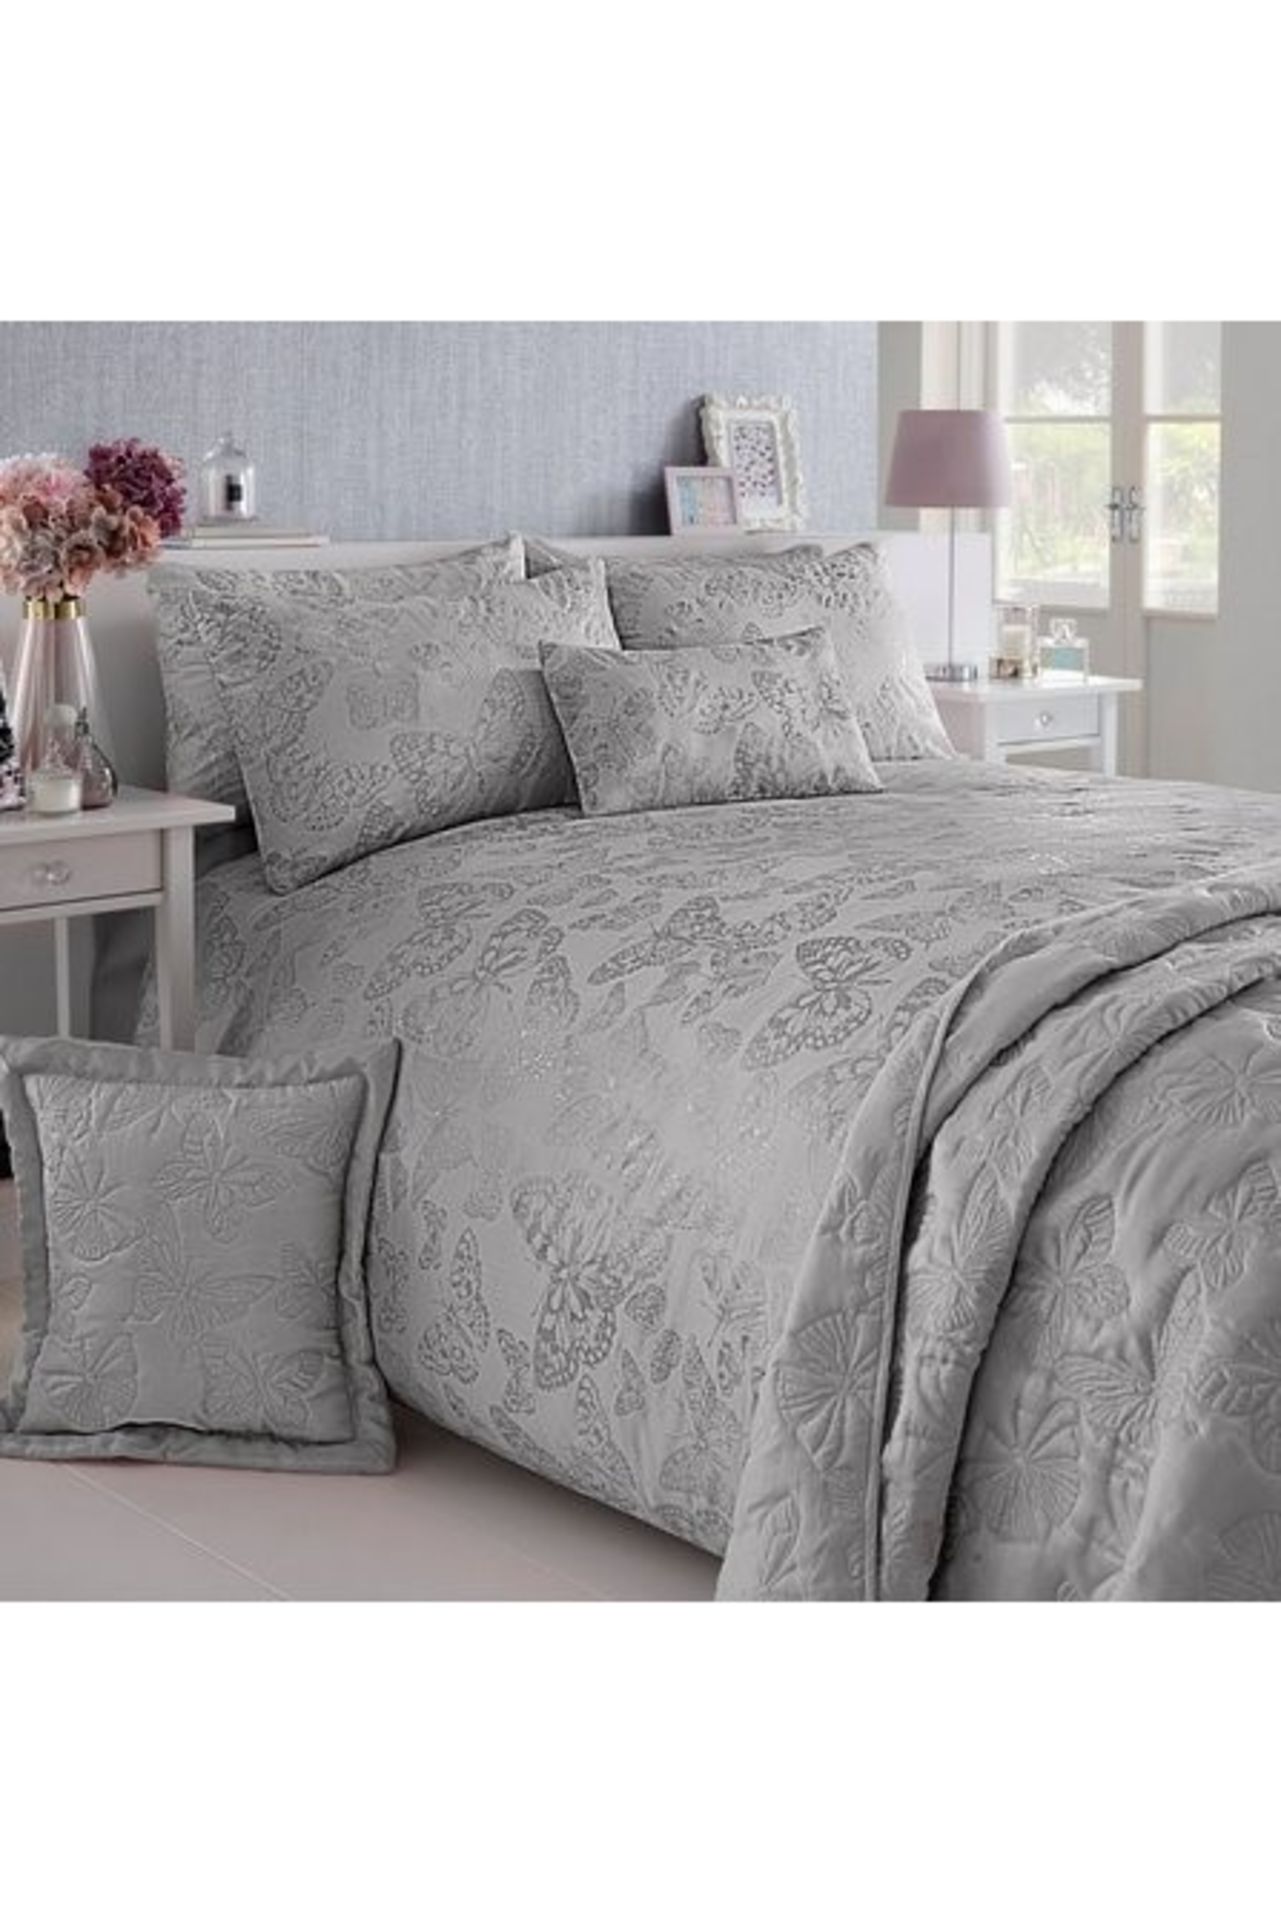 1 BAGGED METALLIC BUTTERFLY KING DUVET SET IN GREY / SIZE 230 X 220CM (PUBLIC VIEWING AVAILABLE)